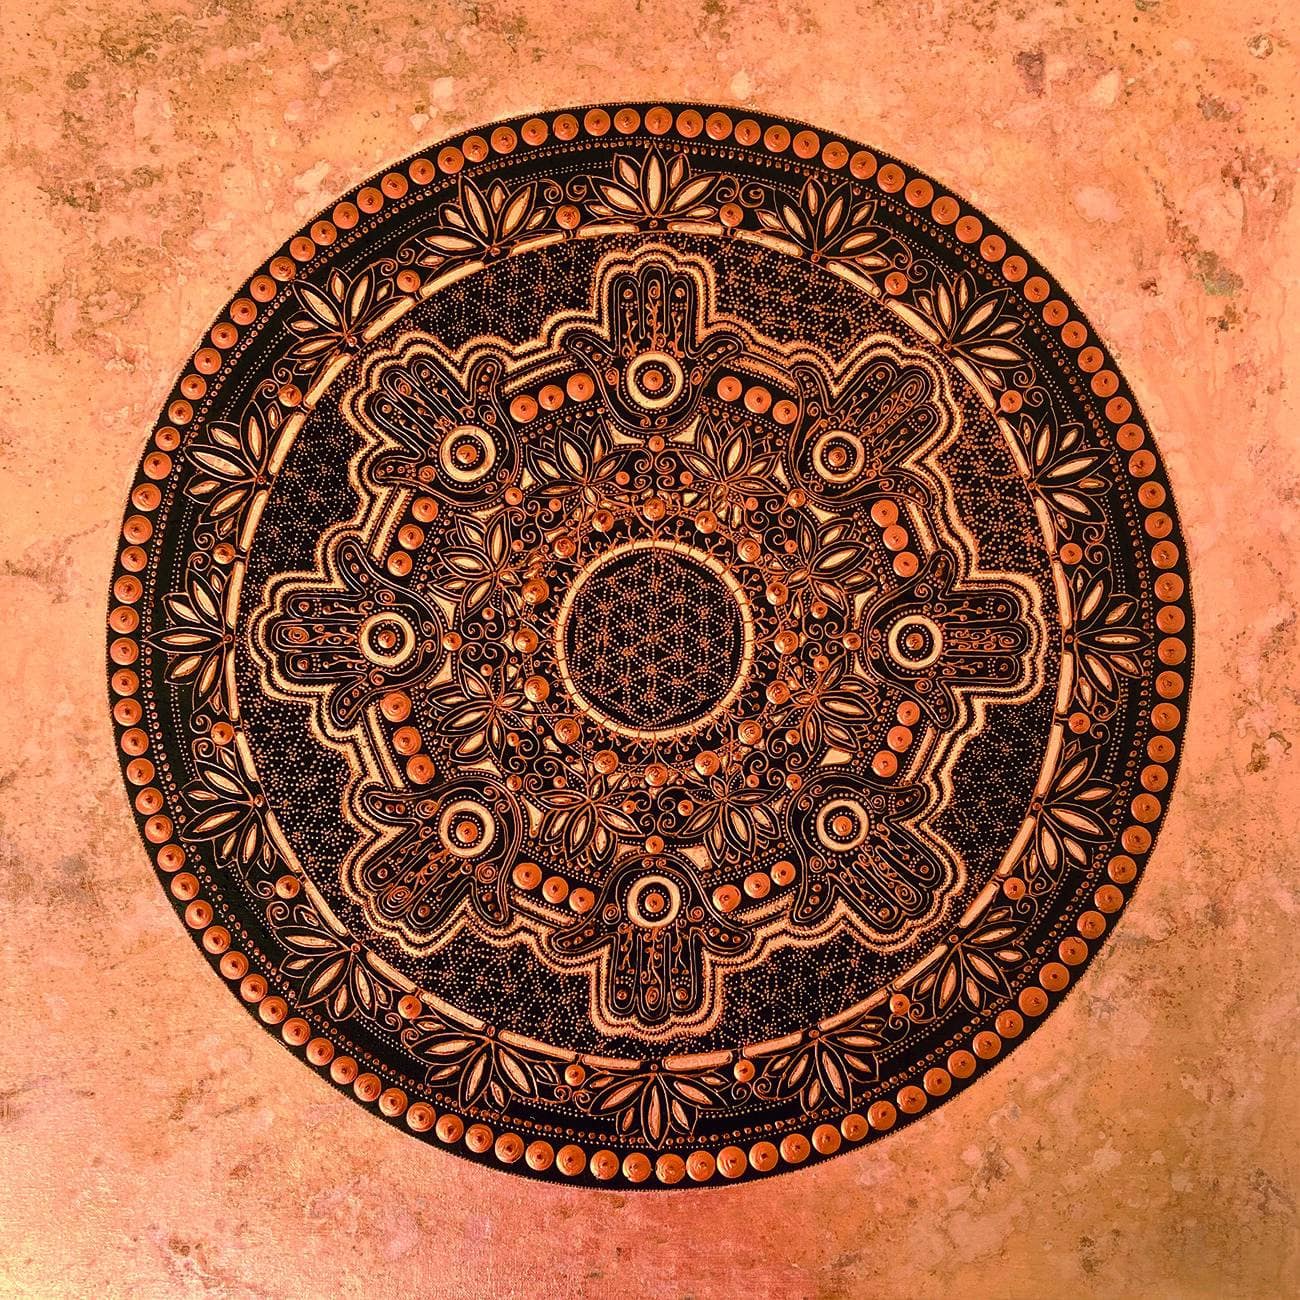 Hamsa mandala / Copper Artists Natali Schäfer Other arts Painting Fabled Gallery https://fabledgallery.art/product/hamsa-mandala-copper/